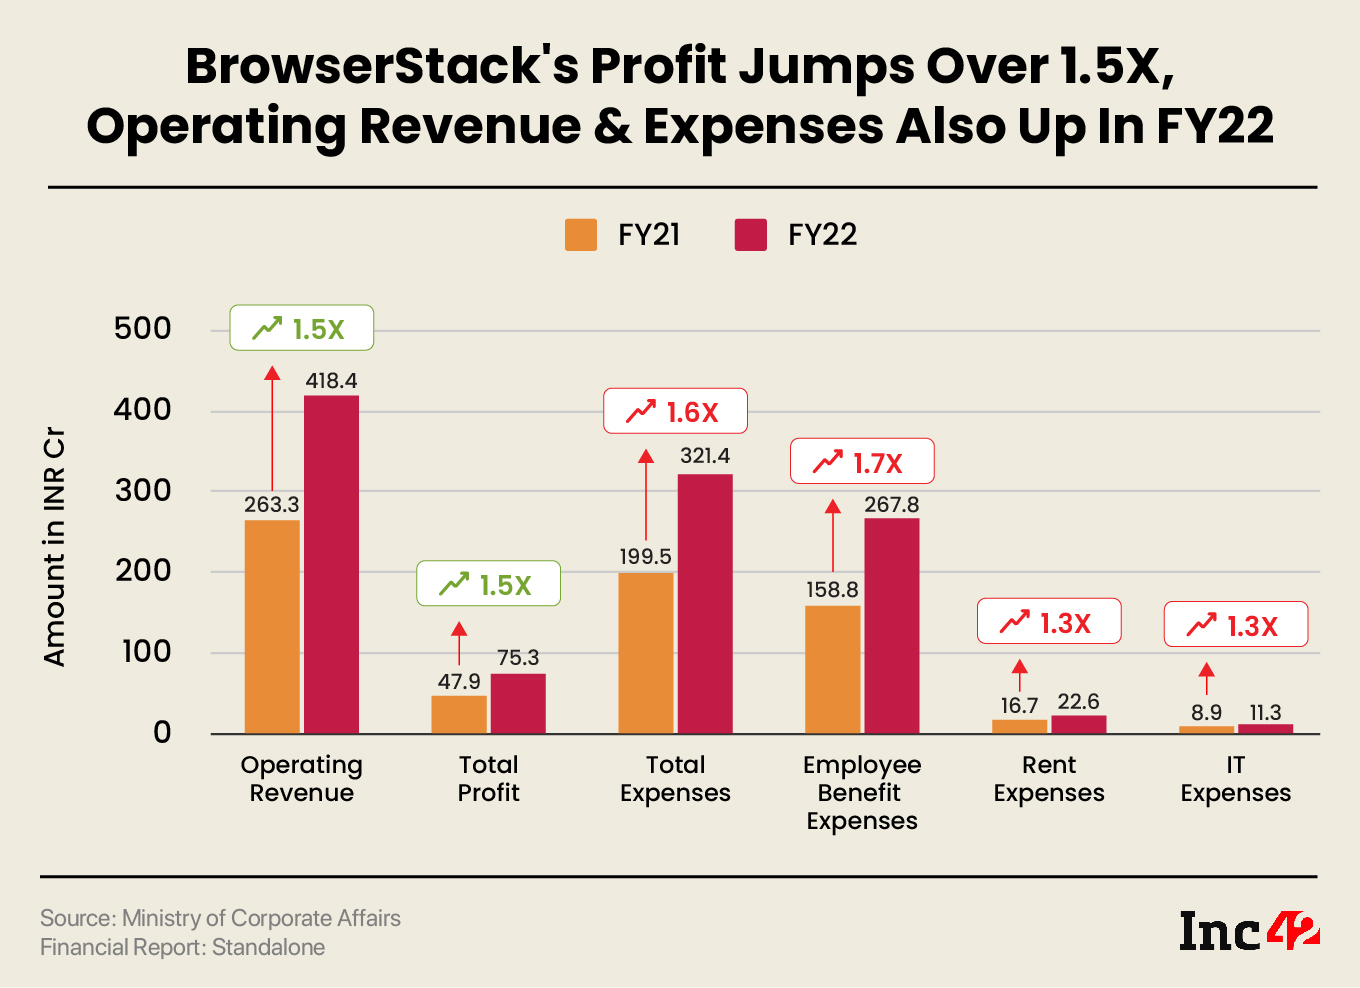 BrowserStack's Profit Jumps Over 1.5X, Operating Revenue & Expenses Also Up In FY22